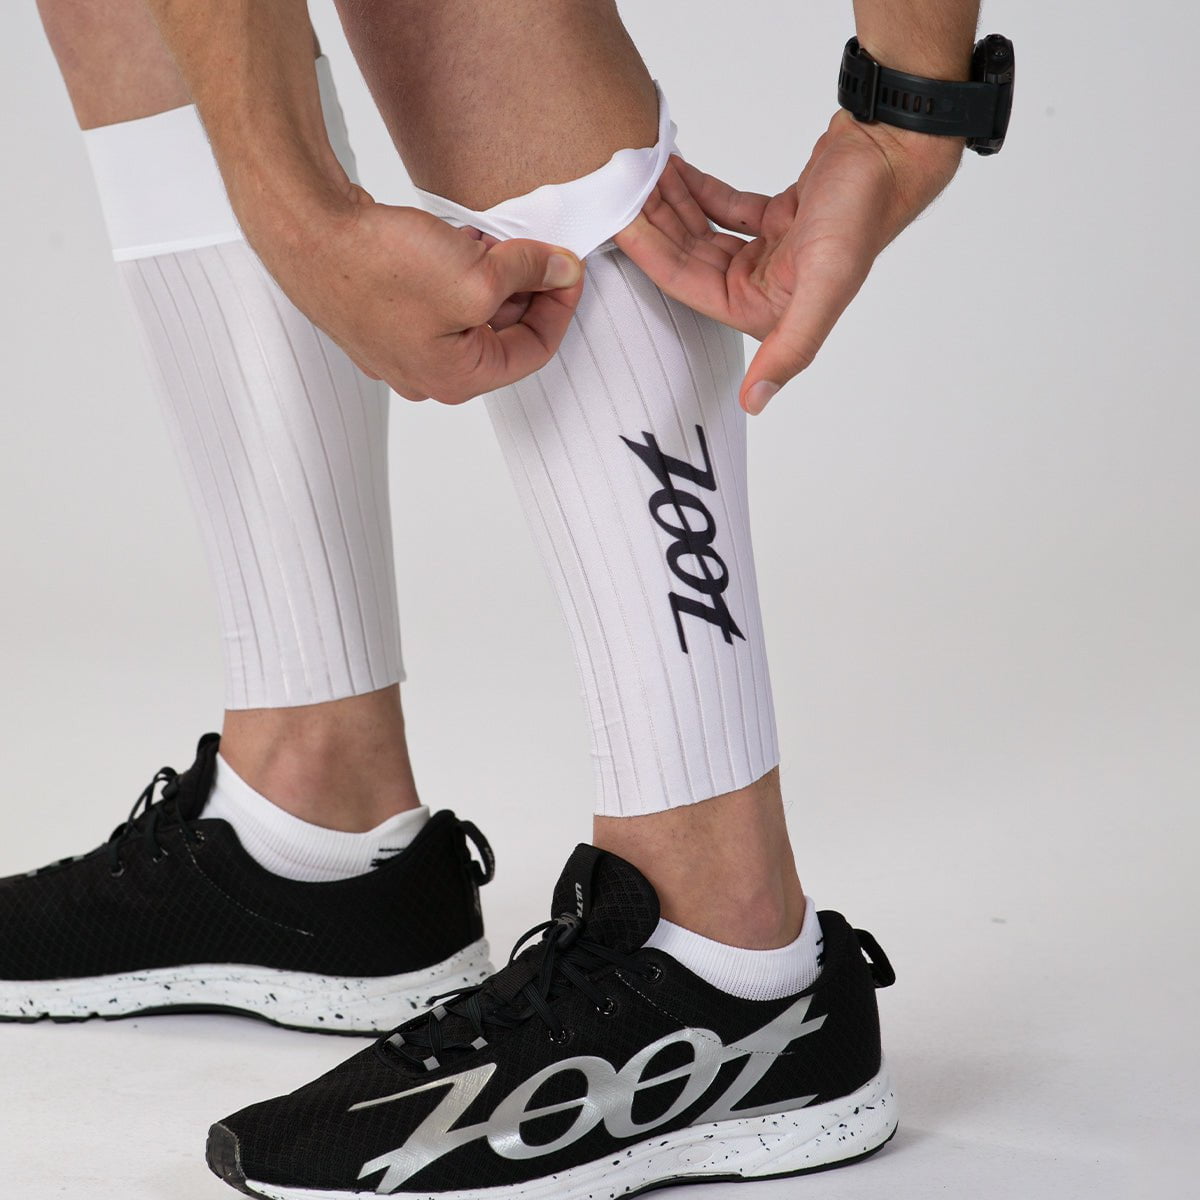 botthms Calf Compression Sleeves